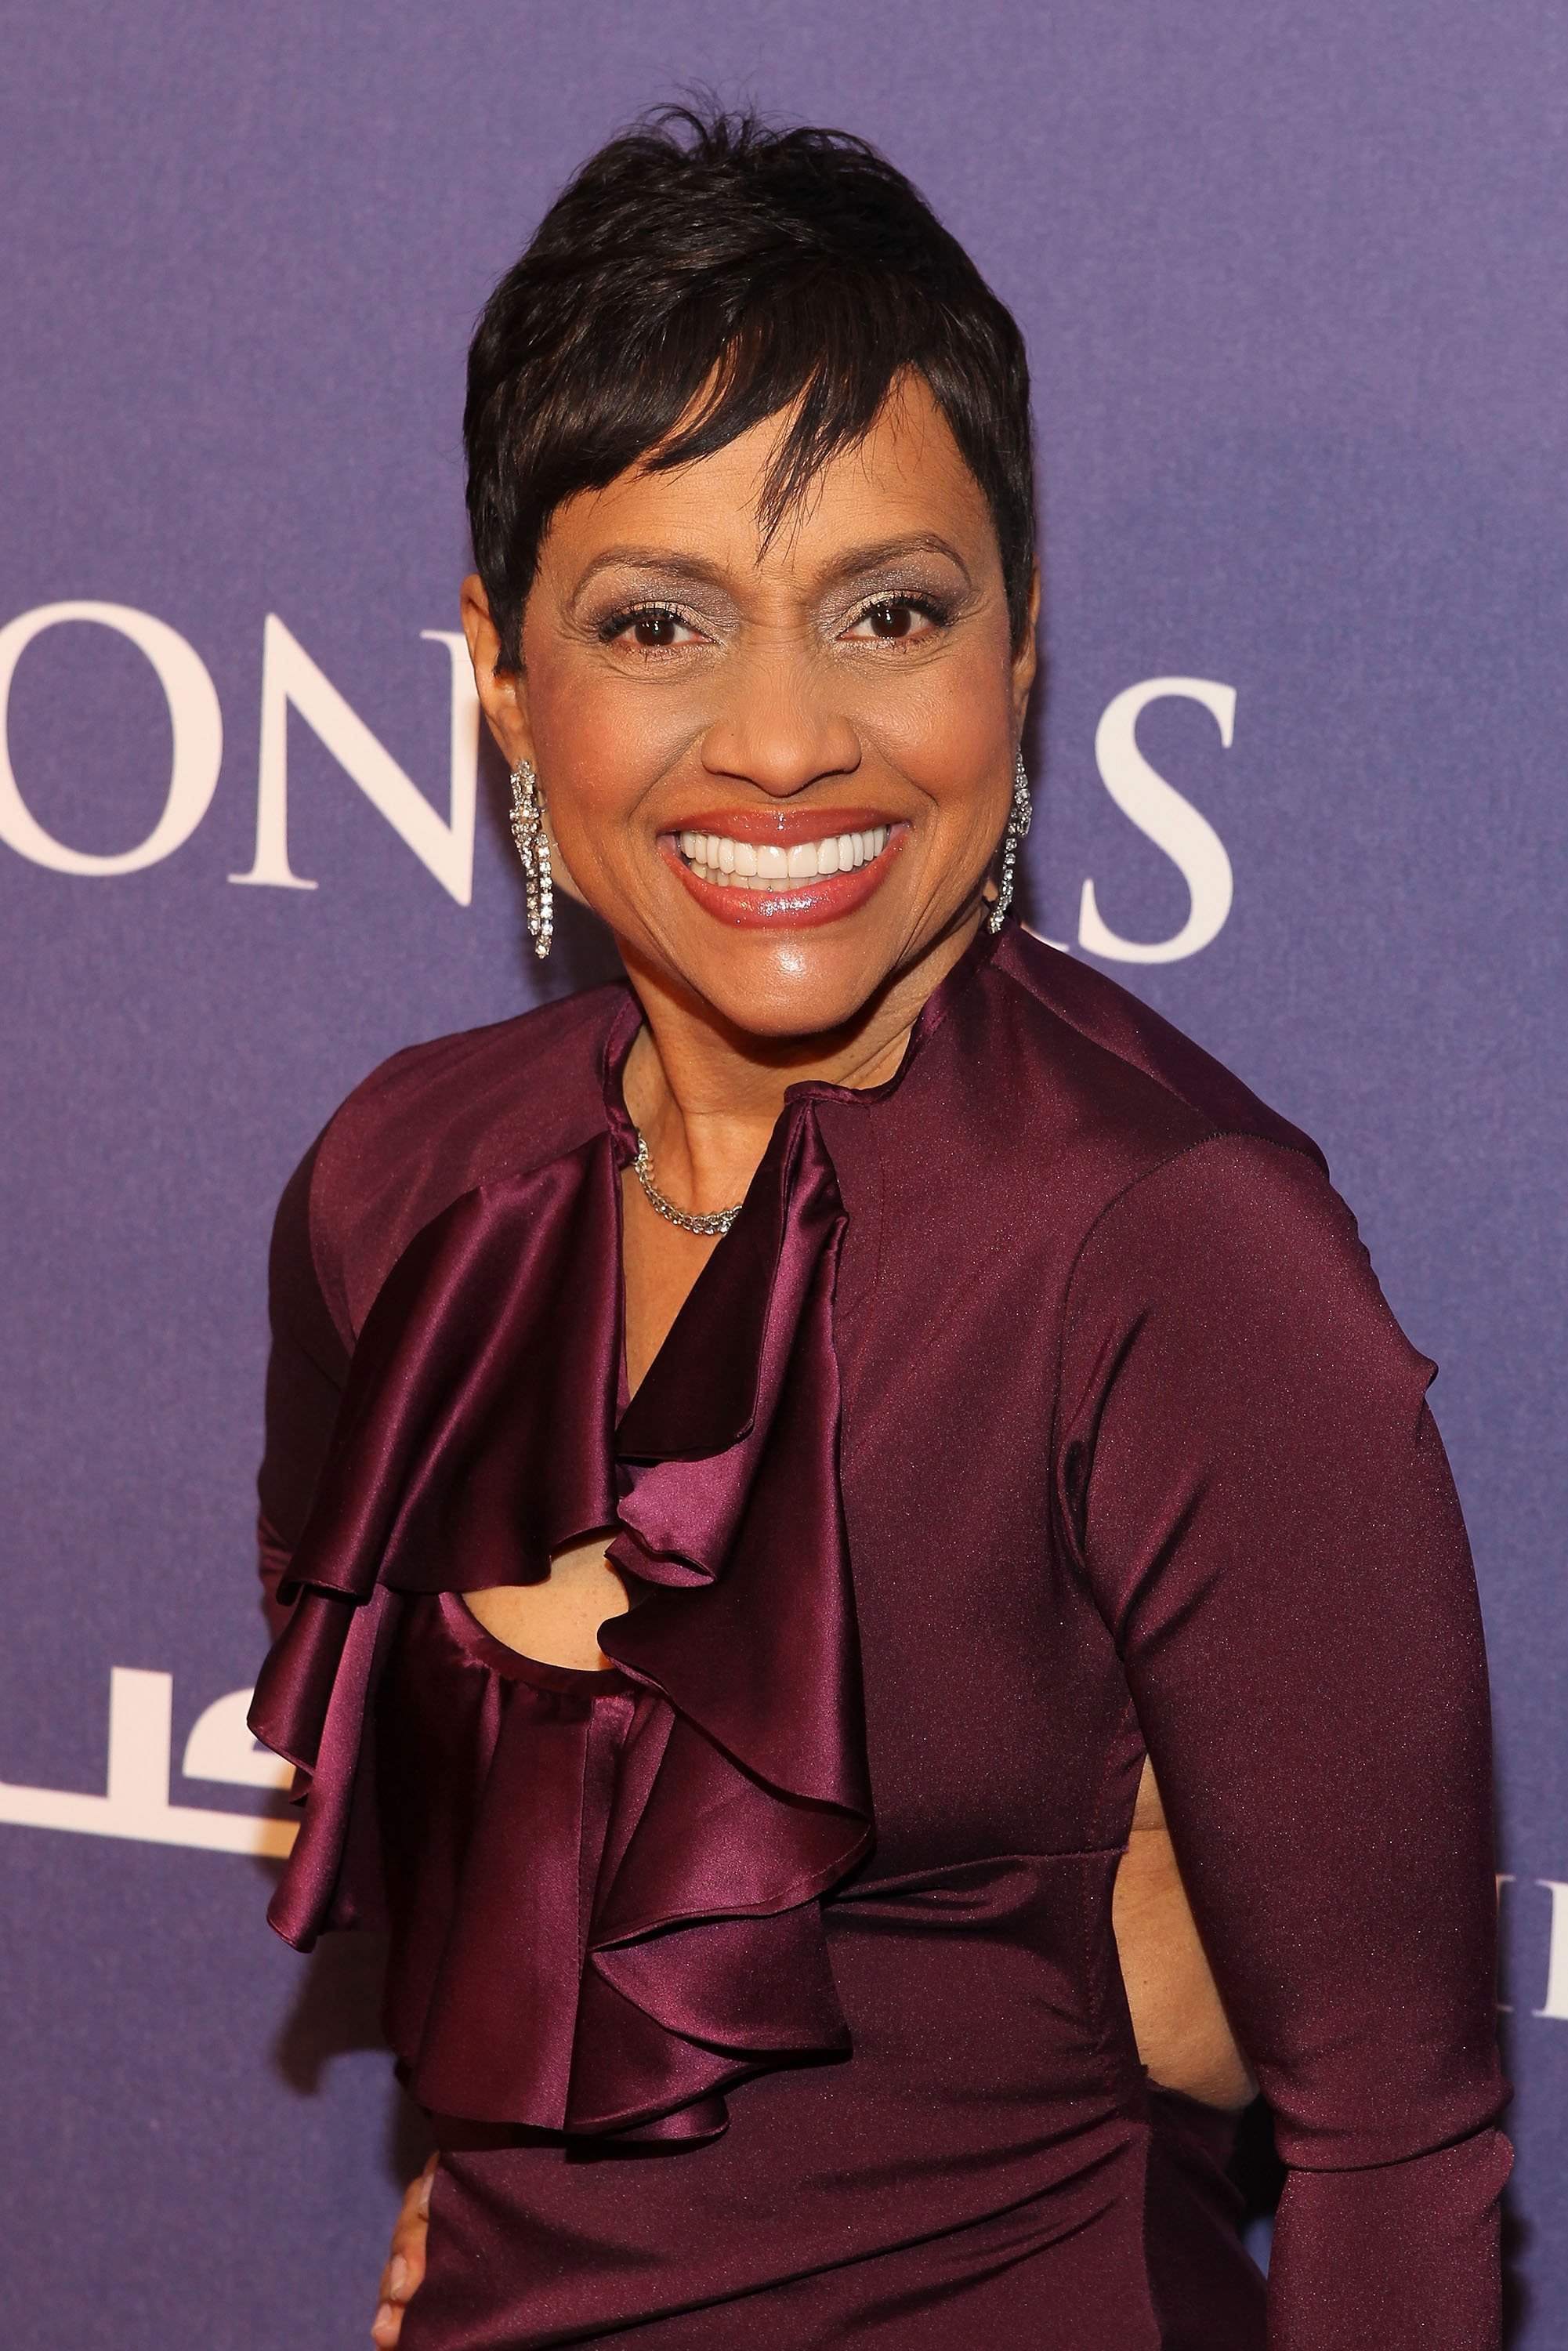 Judge Glenda Hatchett attends BET Honors 2012 at the Warner Theatre on January 14, 2012. | Photo: Getty Images